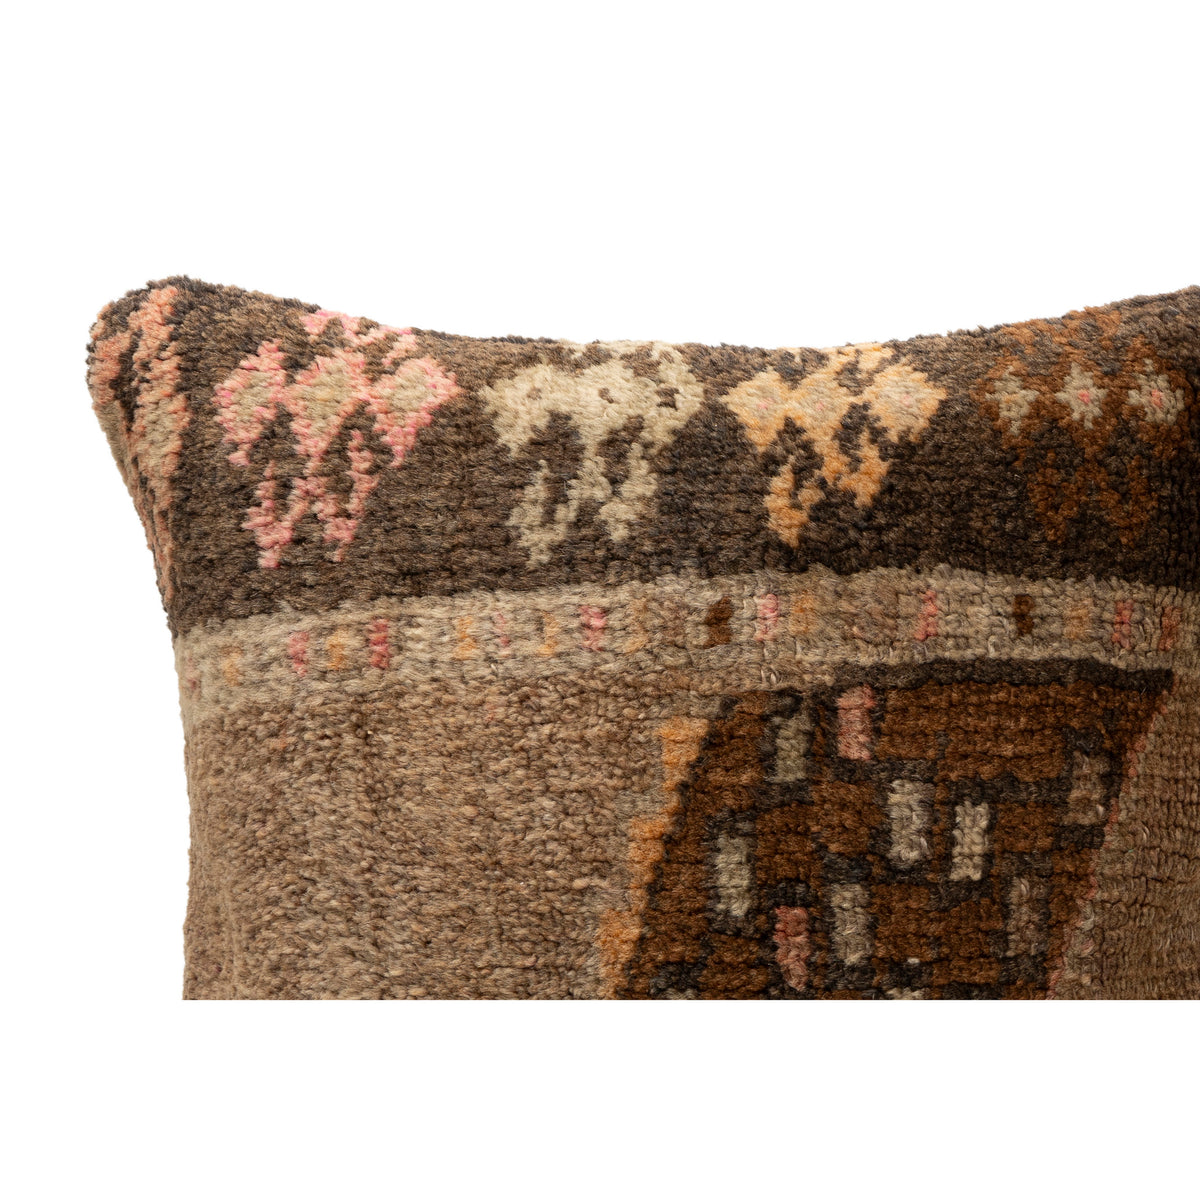 Handwoven Vintage Rug Pillow Cover 16" x 16"